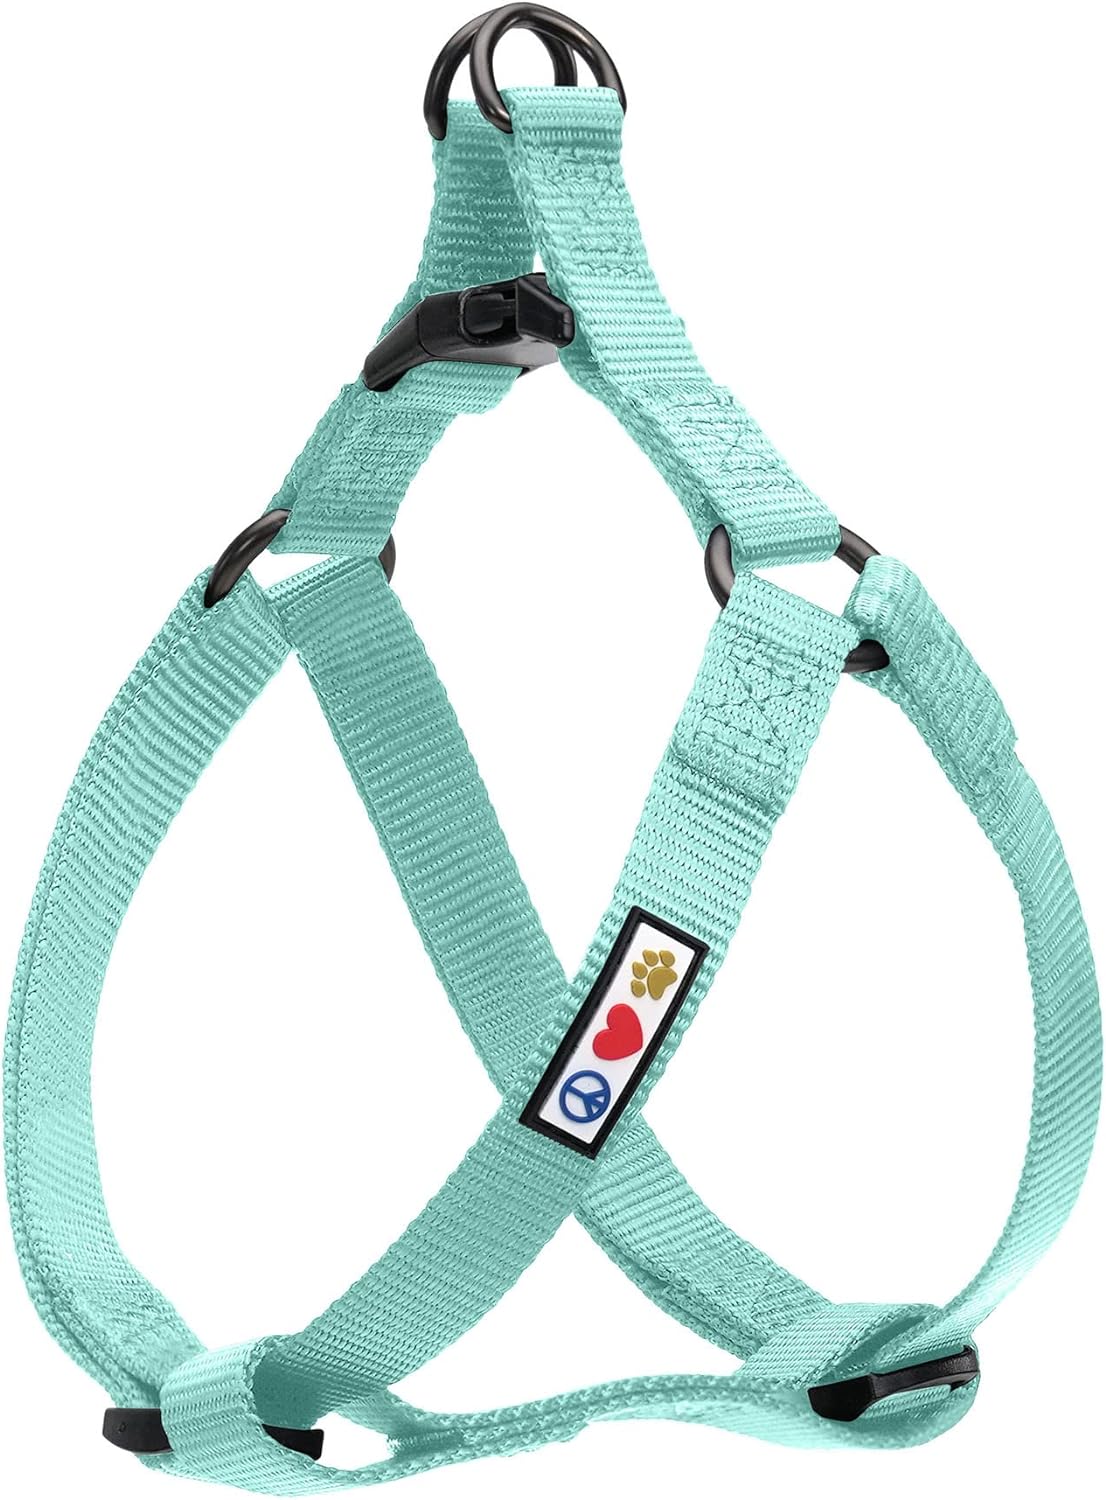 Pawtitas Extra Small Dog Harness Adjustable Dog Harness No Pull Harness For Dogs Solid Color XS Teal Harness